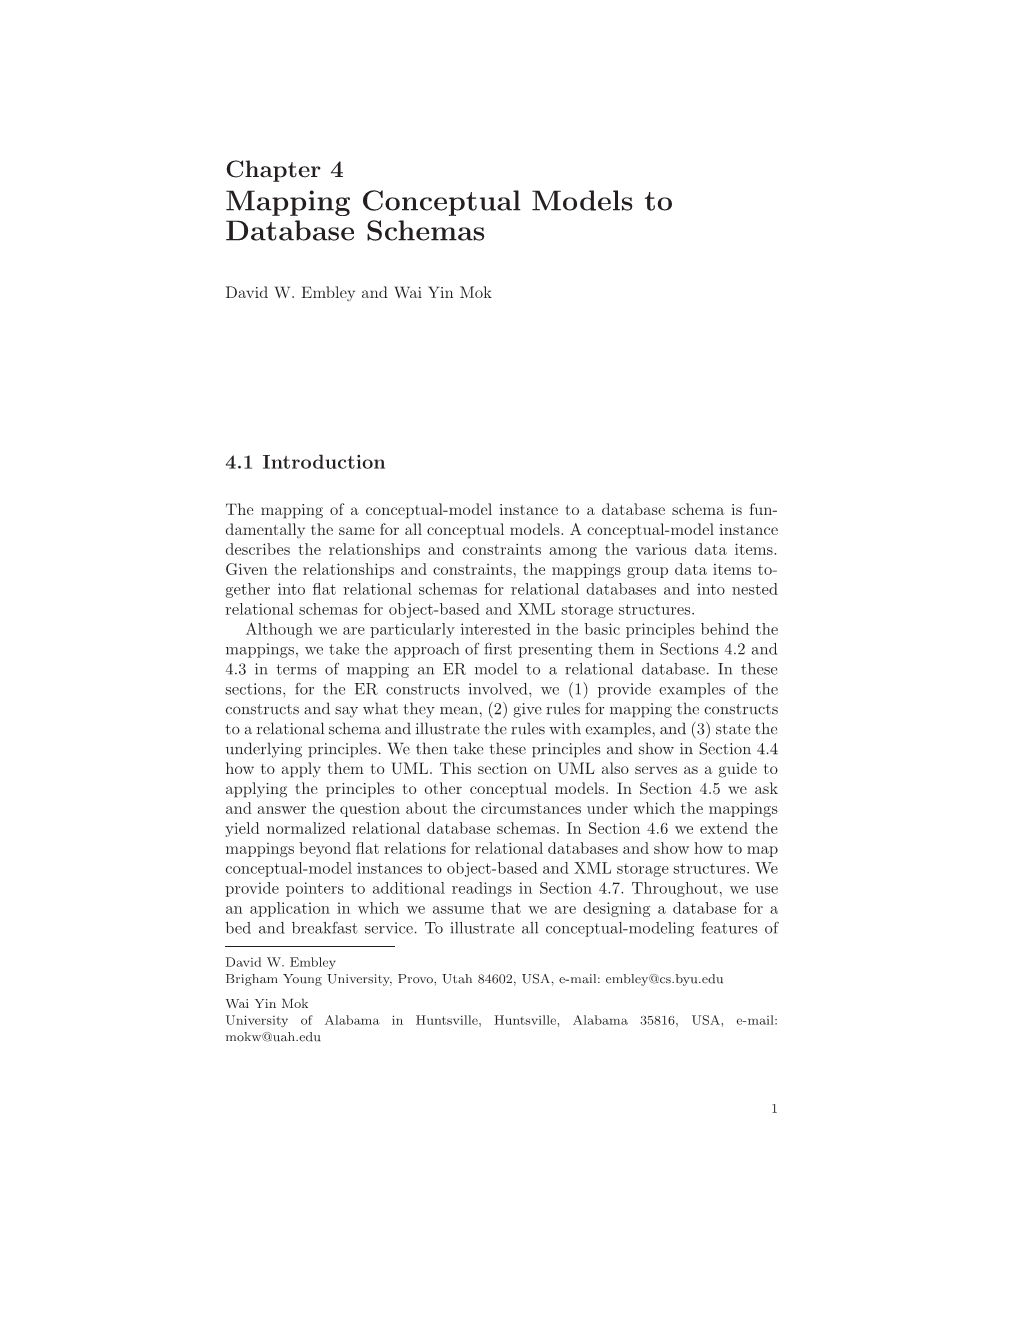 Mapping Conceptual Models to Database Schemas